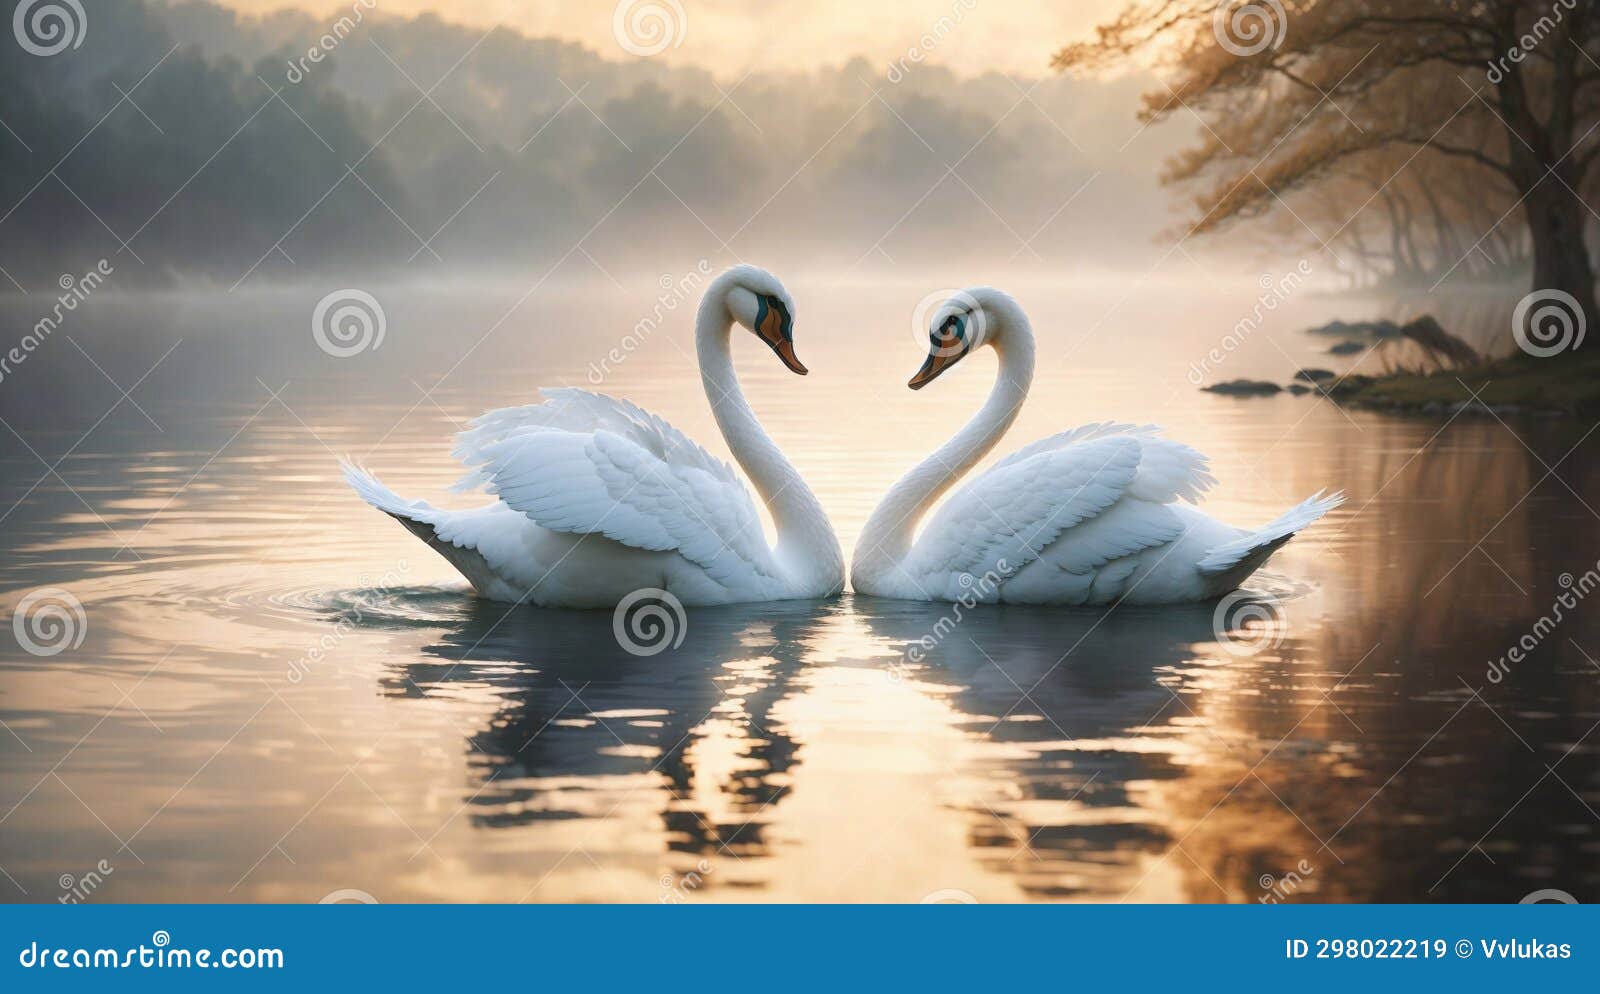 two elegant swans in love gracefully glide across a serene lake in the forest.